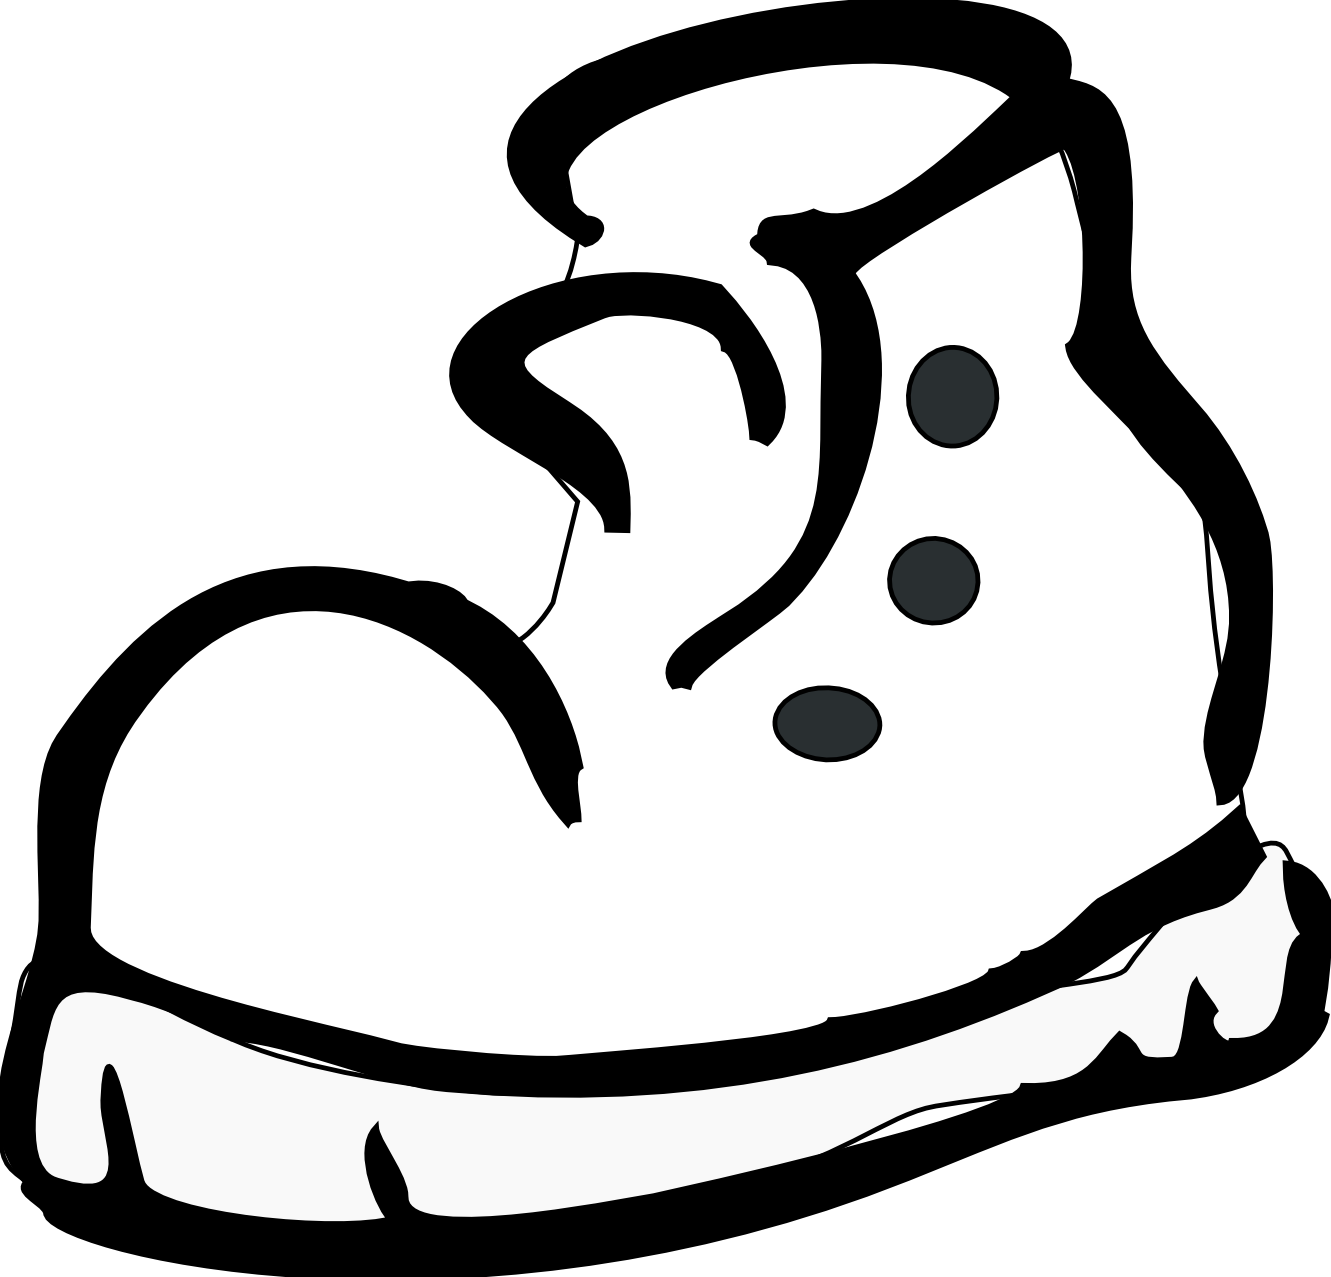 free black and white clip art shoes - photo #21